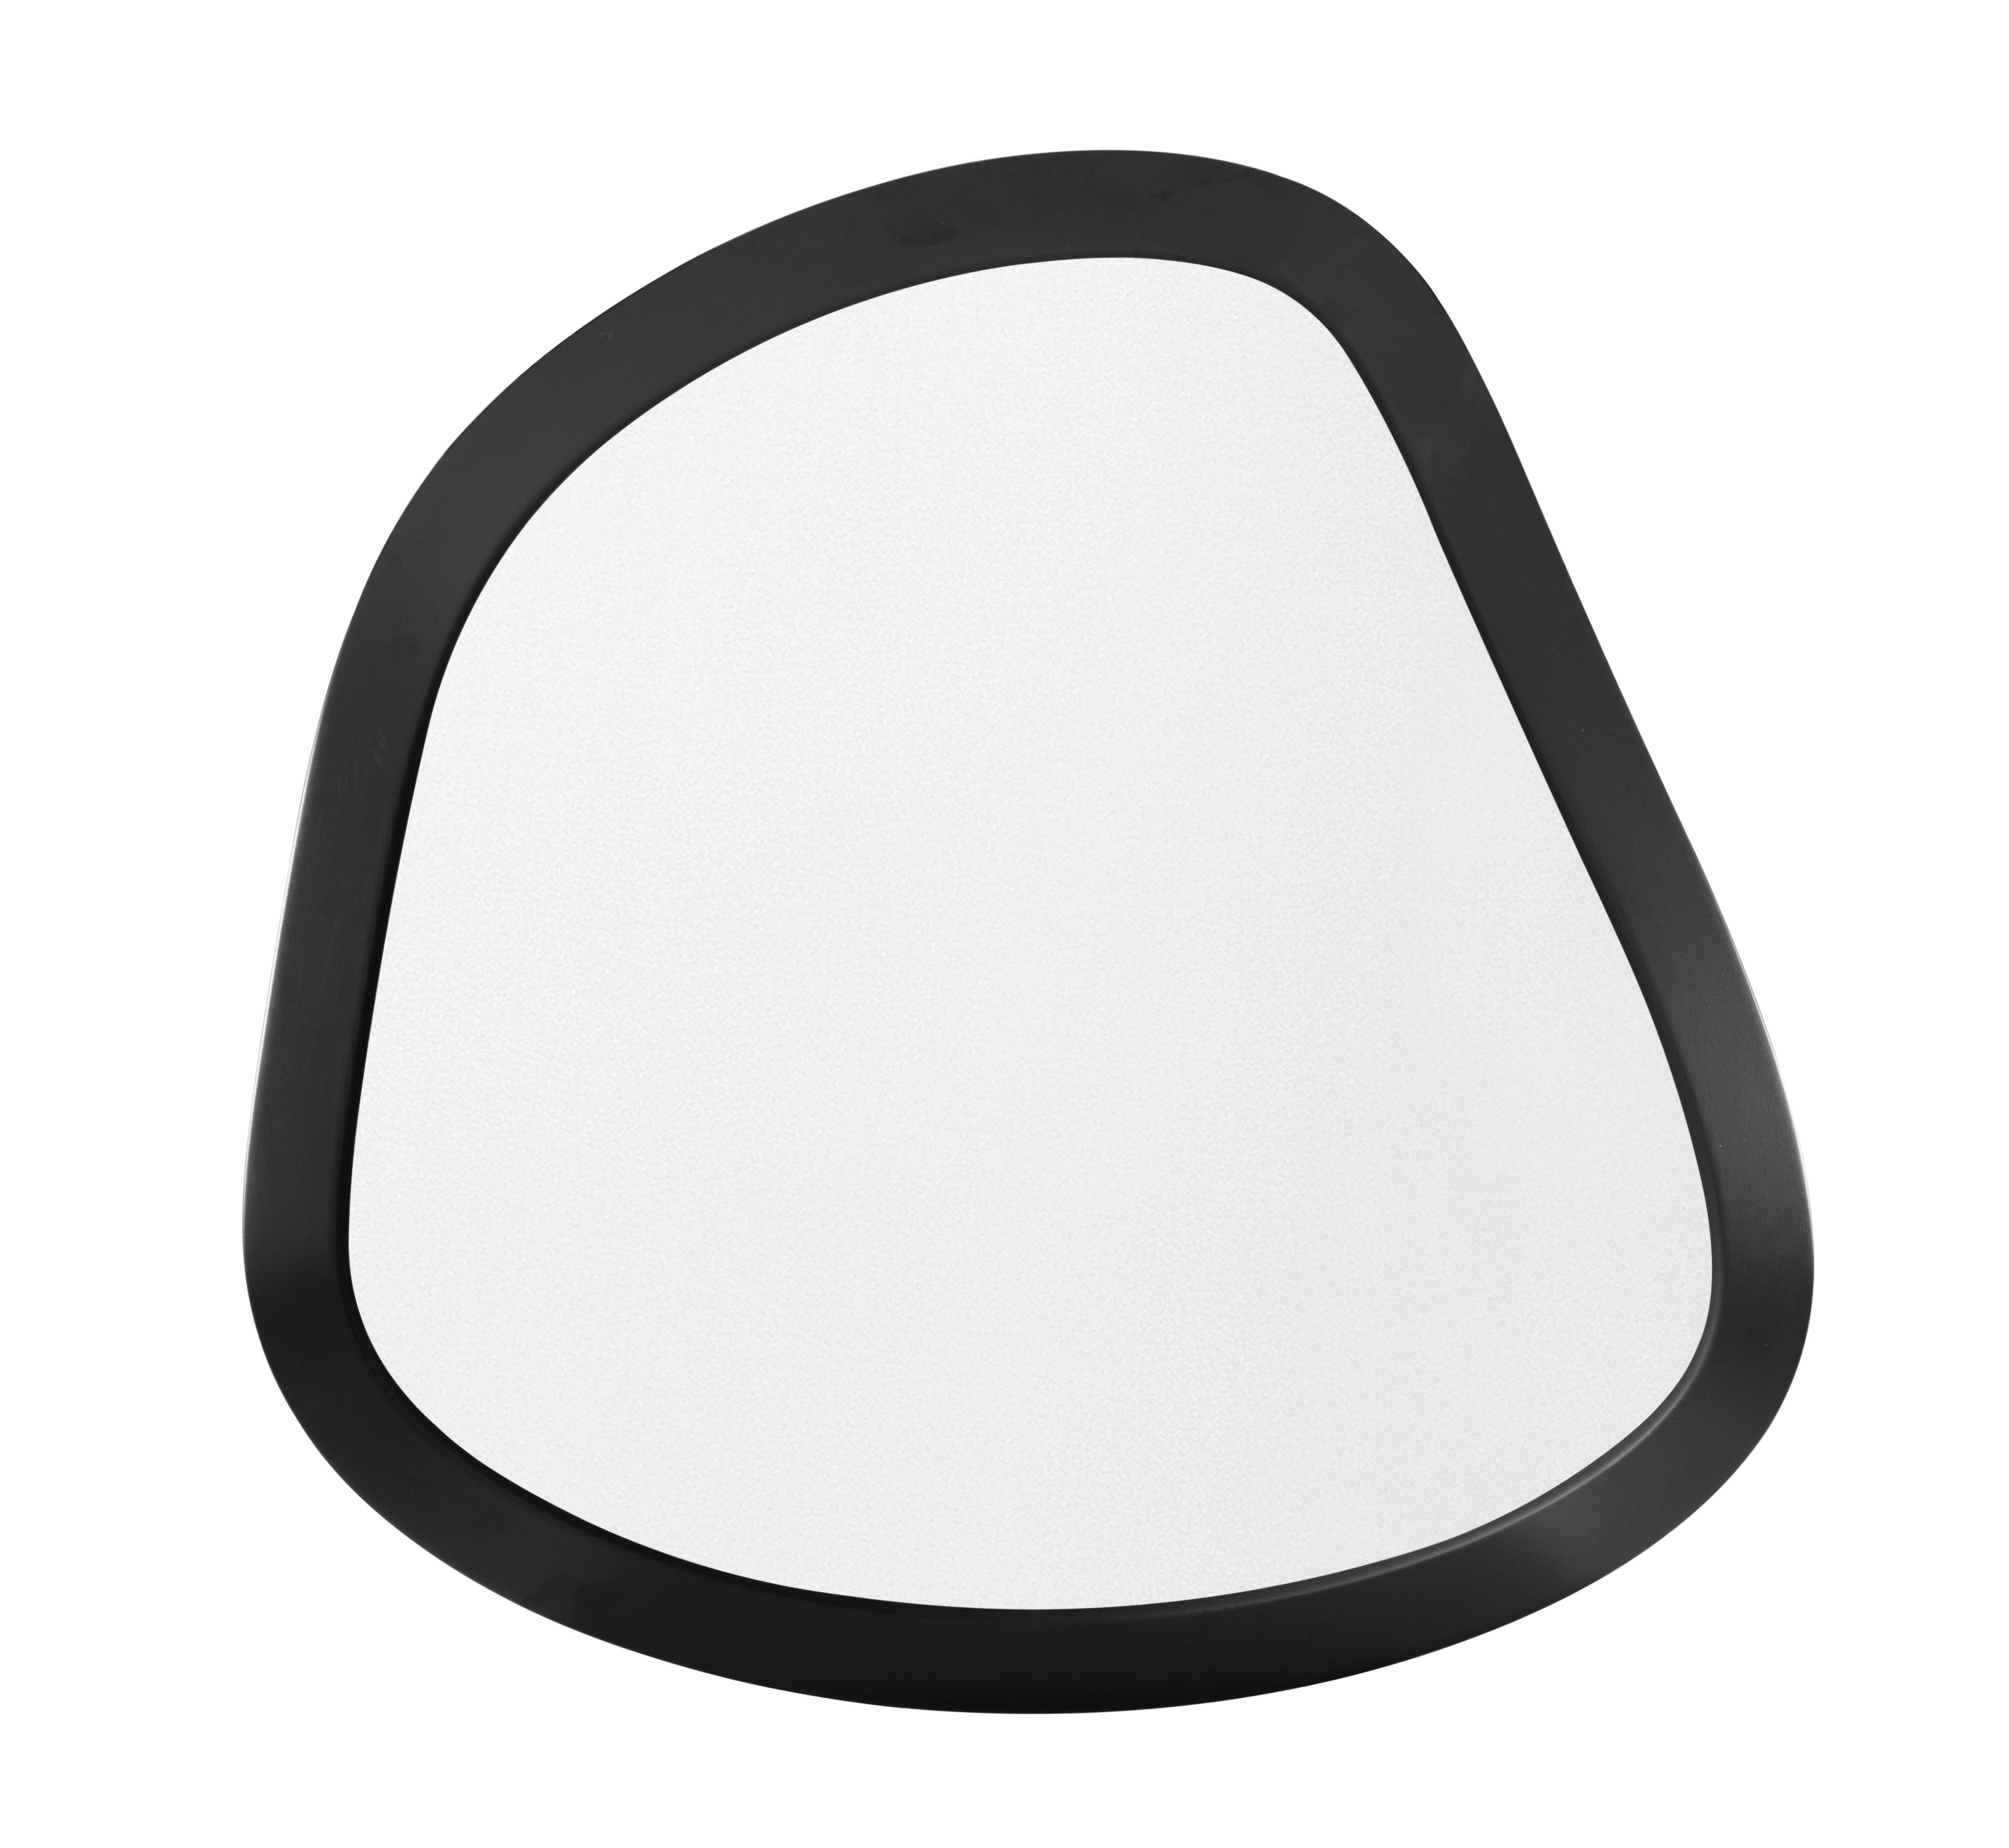 Brazilian Pante Mirror In Black Wood Finish, Set of 4 For Sale